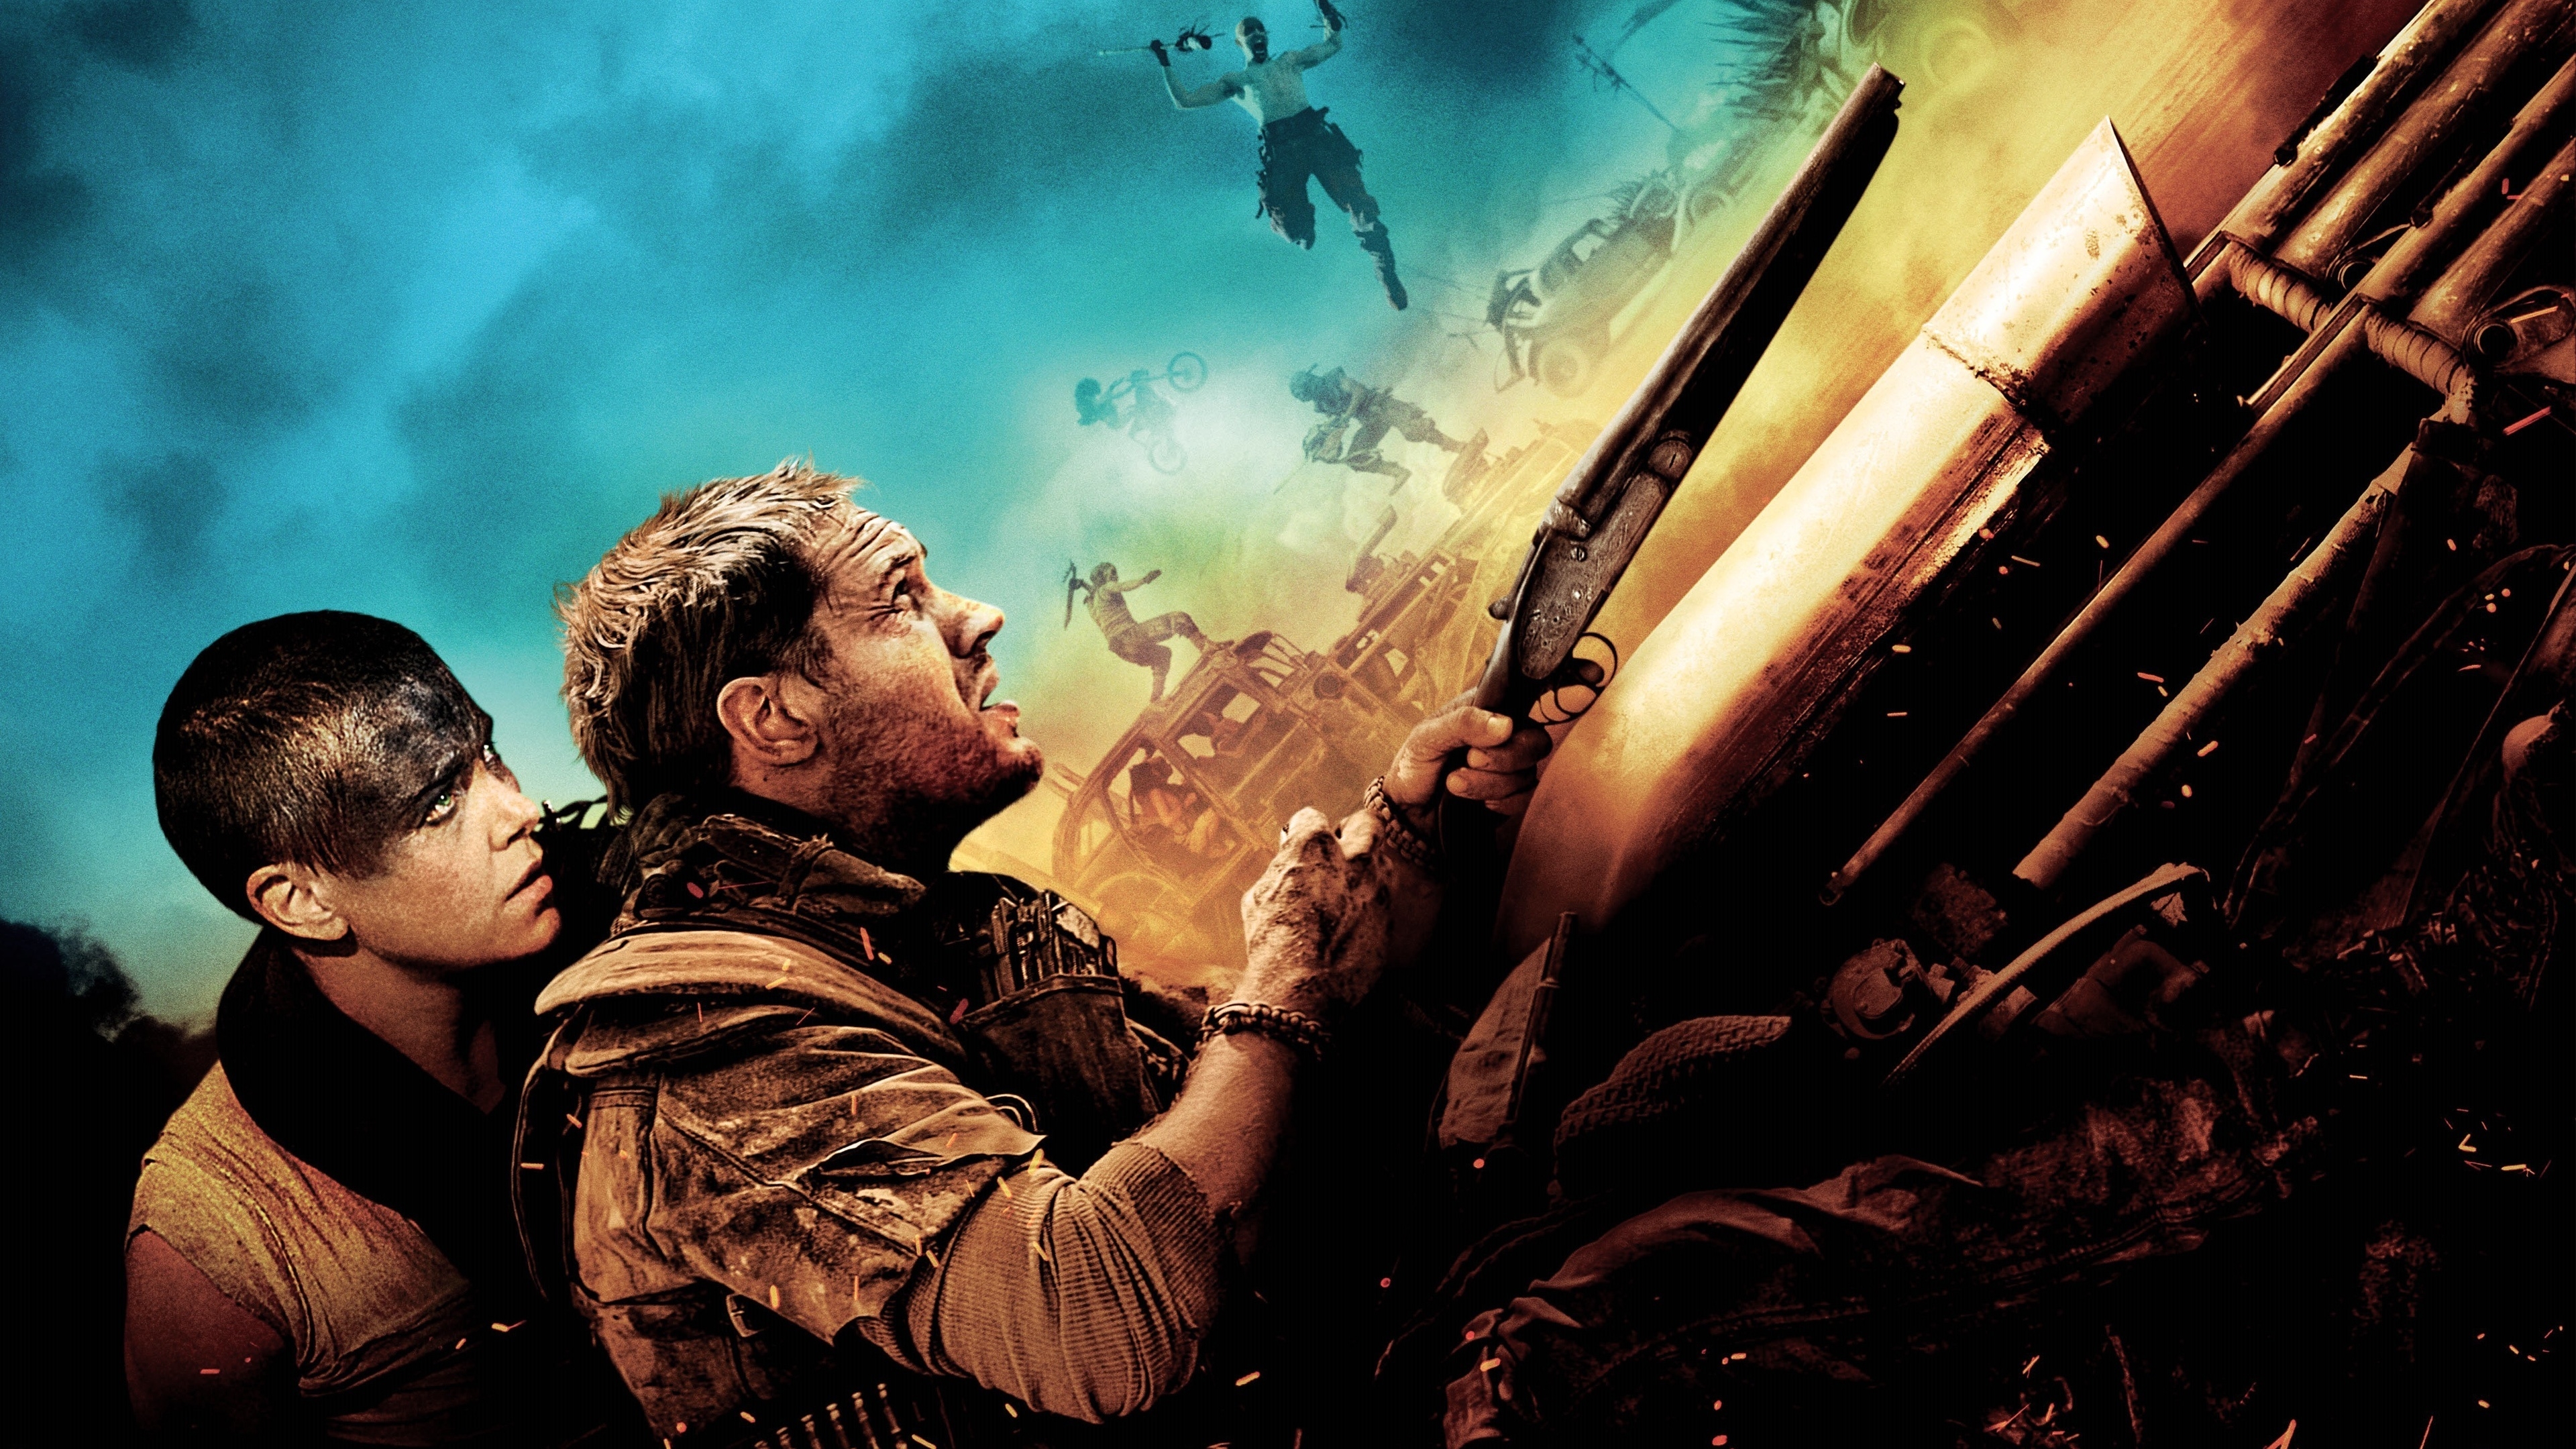 Mad Max 2015 for 3840 x 2160 Ultra HD resolution